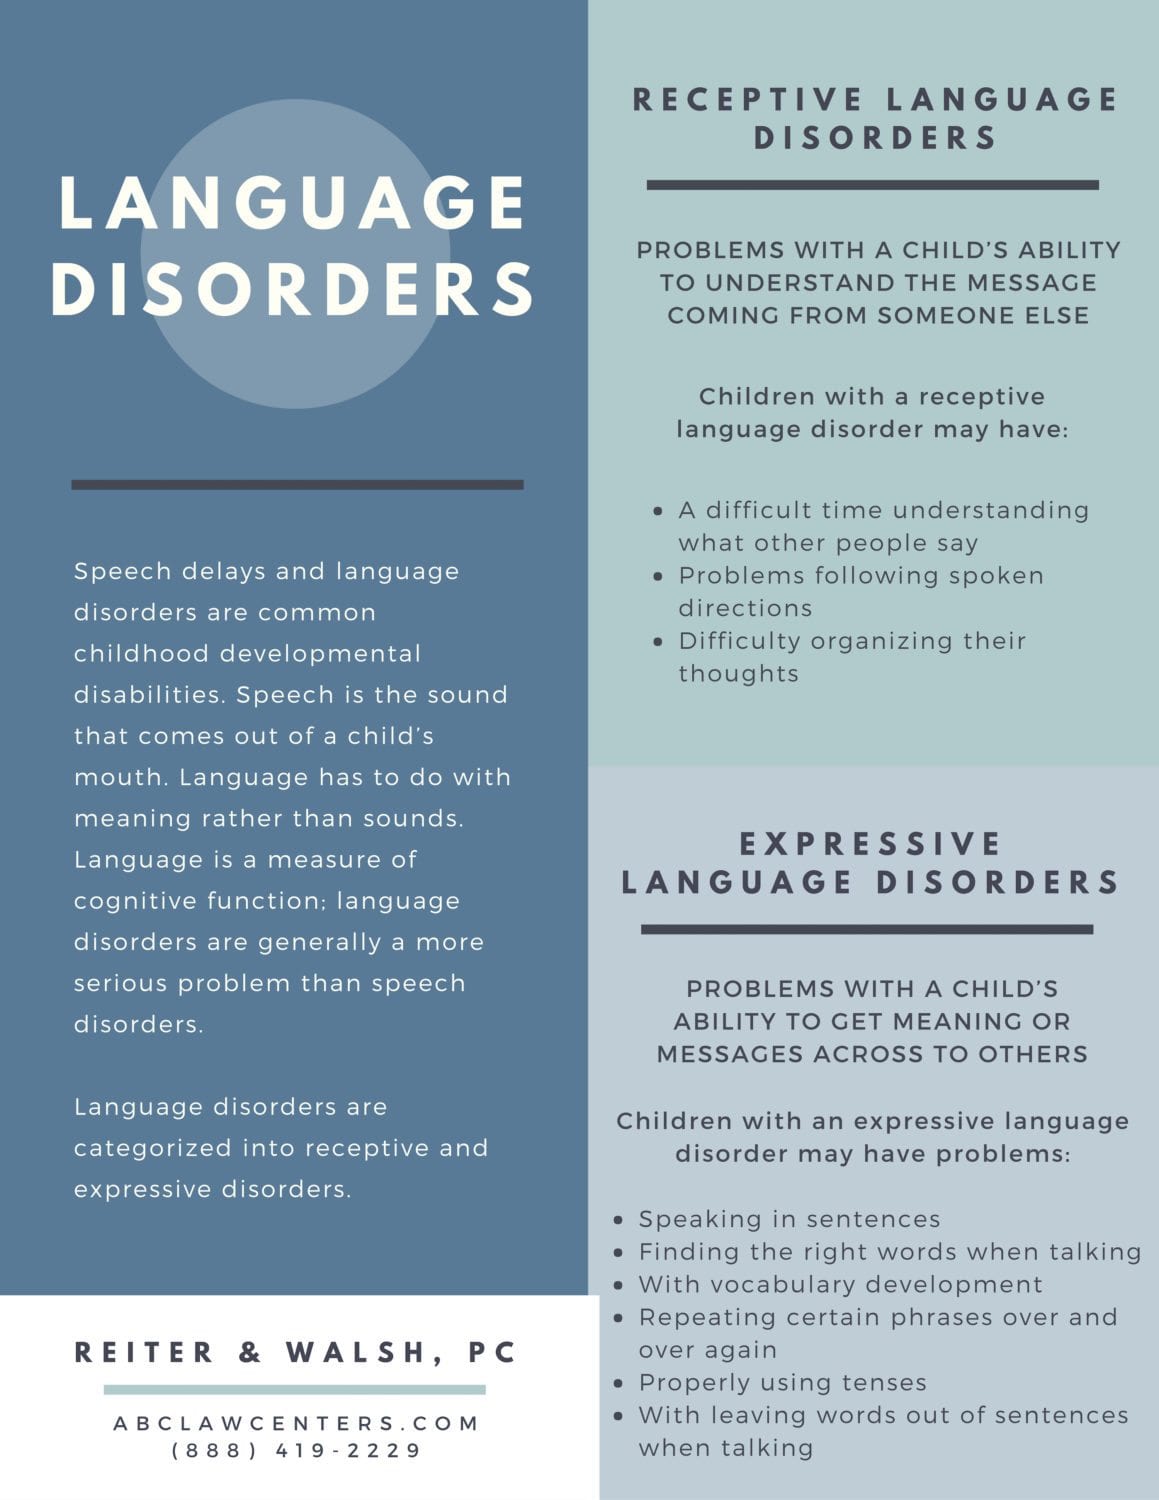 comparing expressive language disorders and reception language disorders